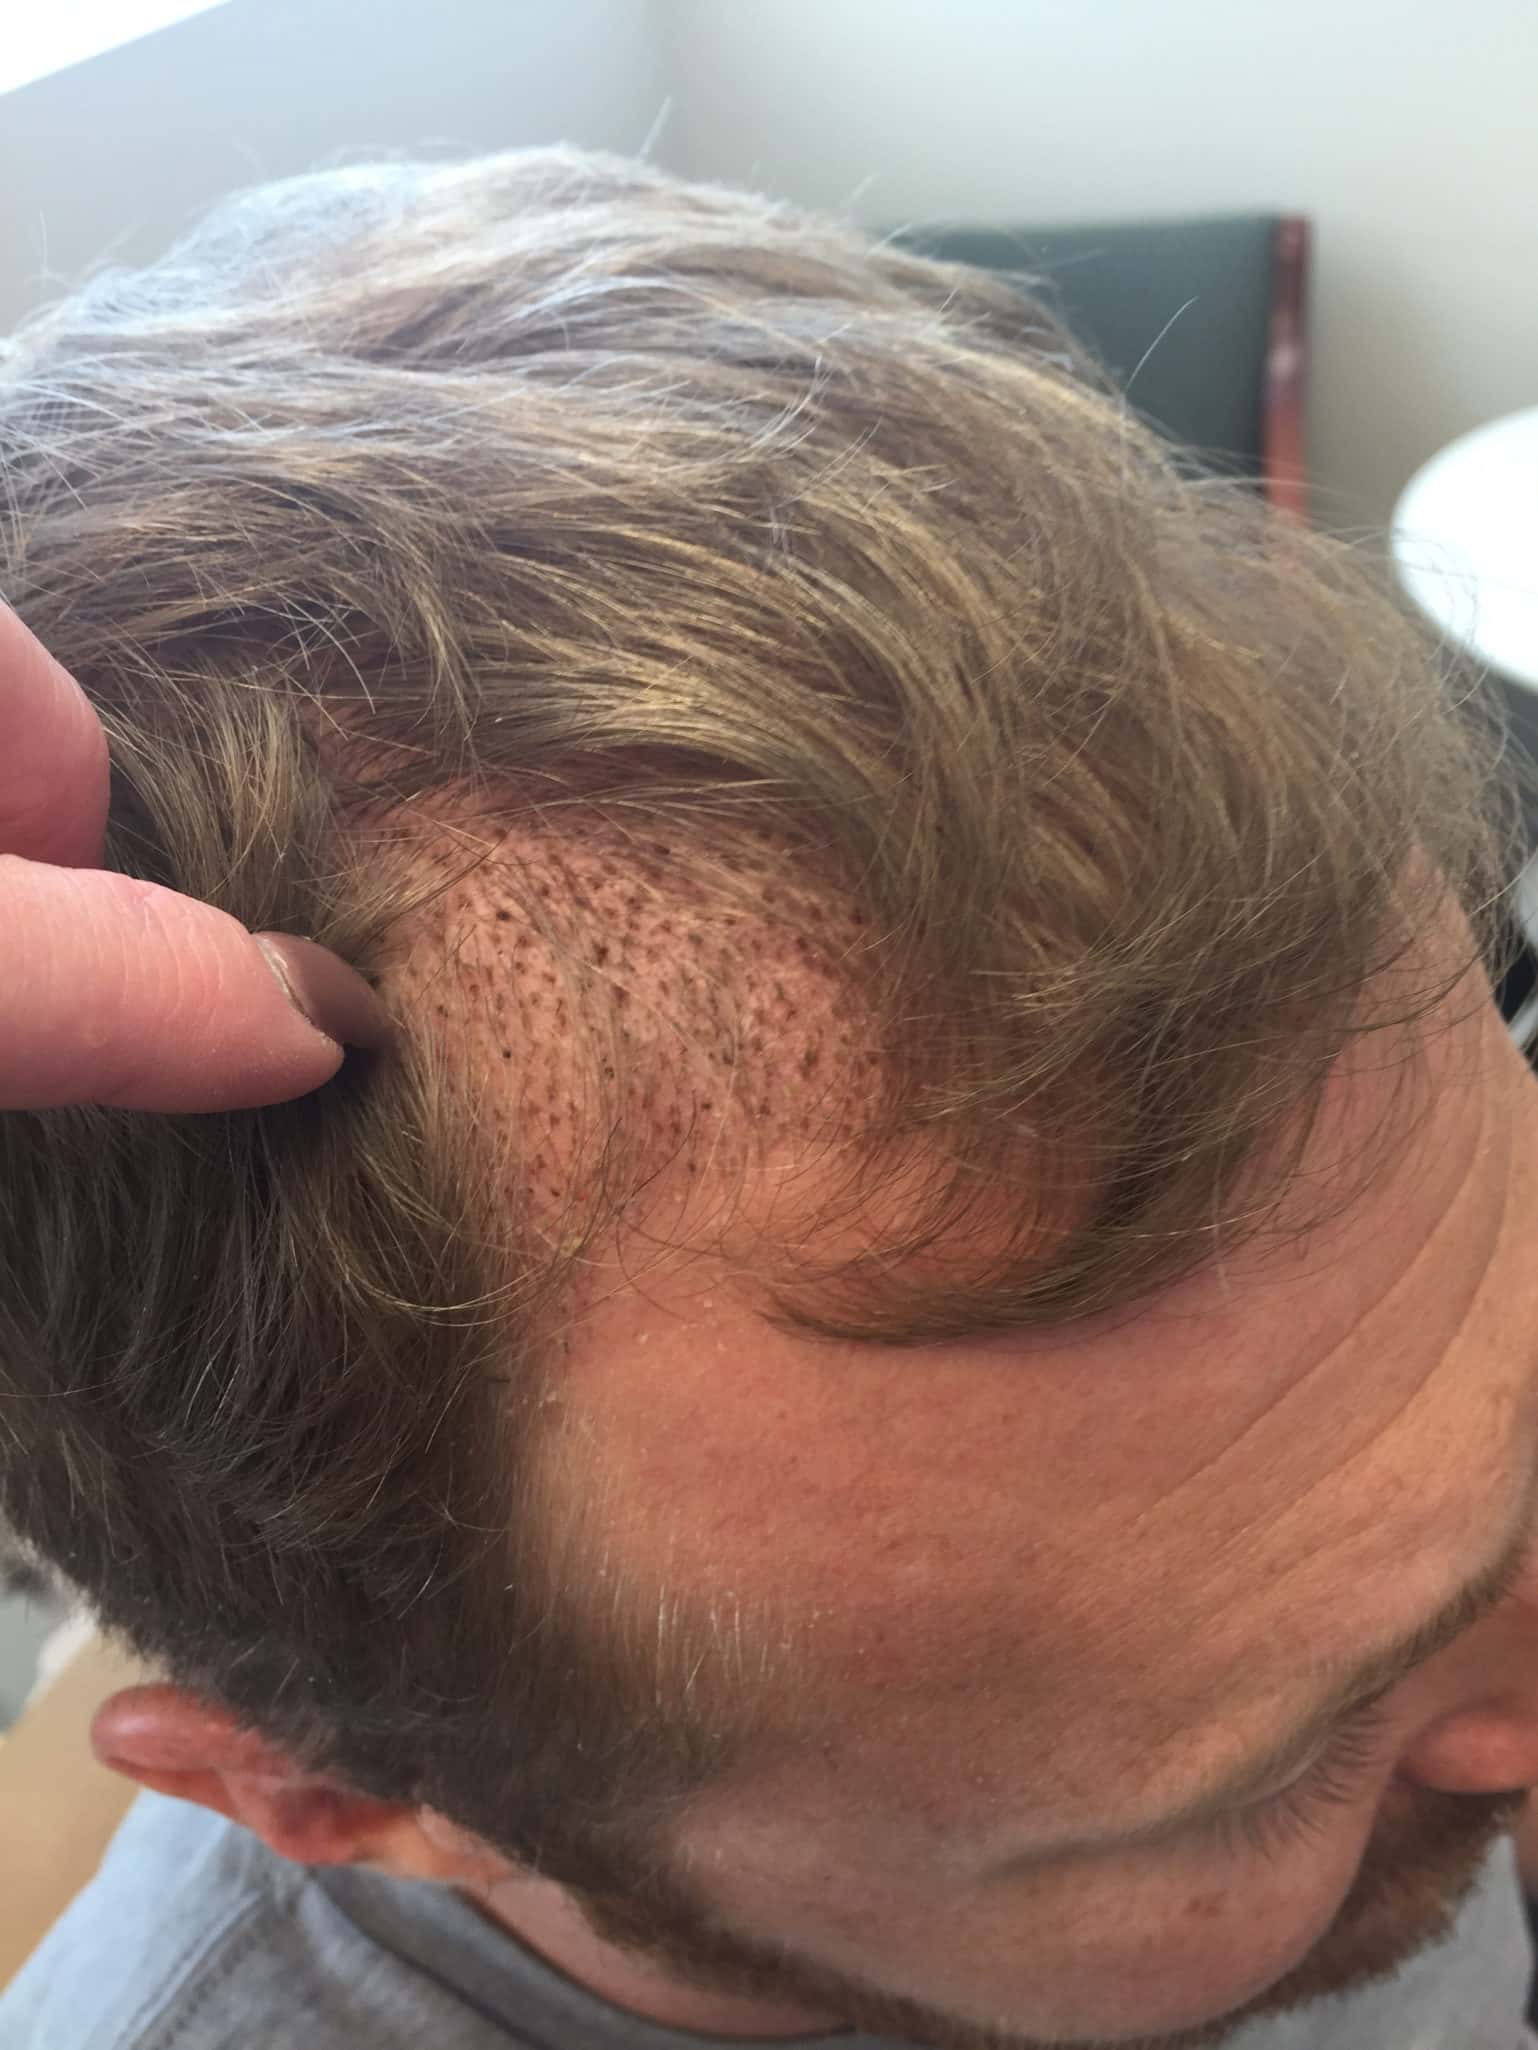 hair transplant surgery scabs